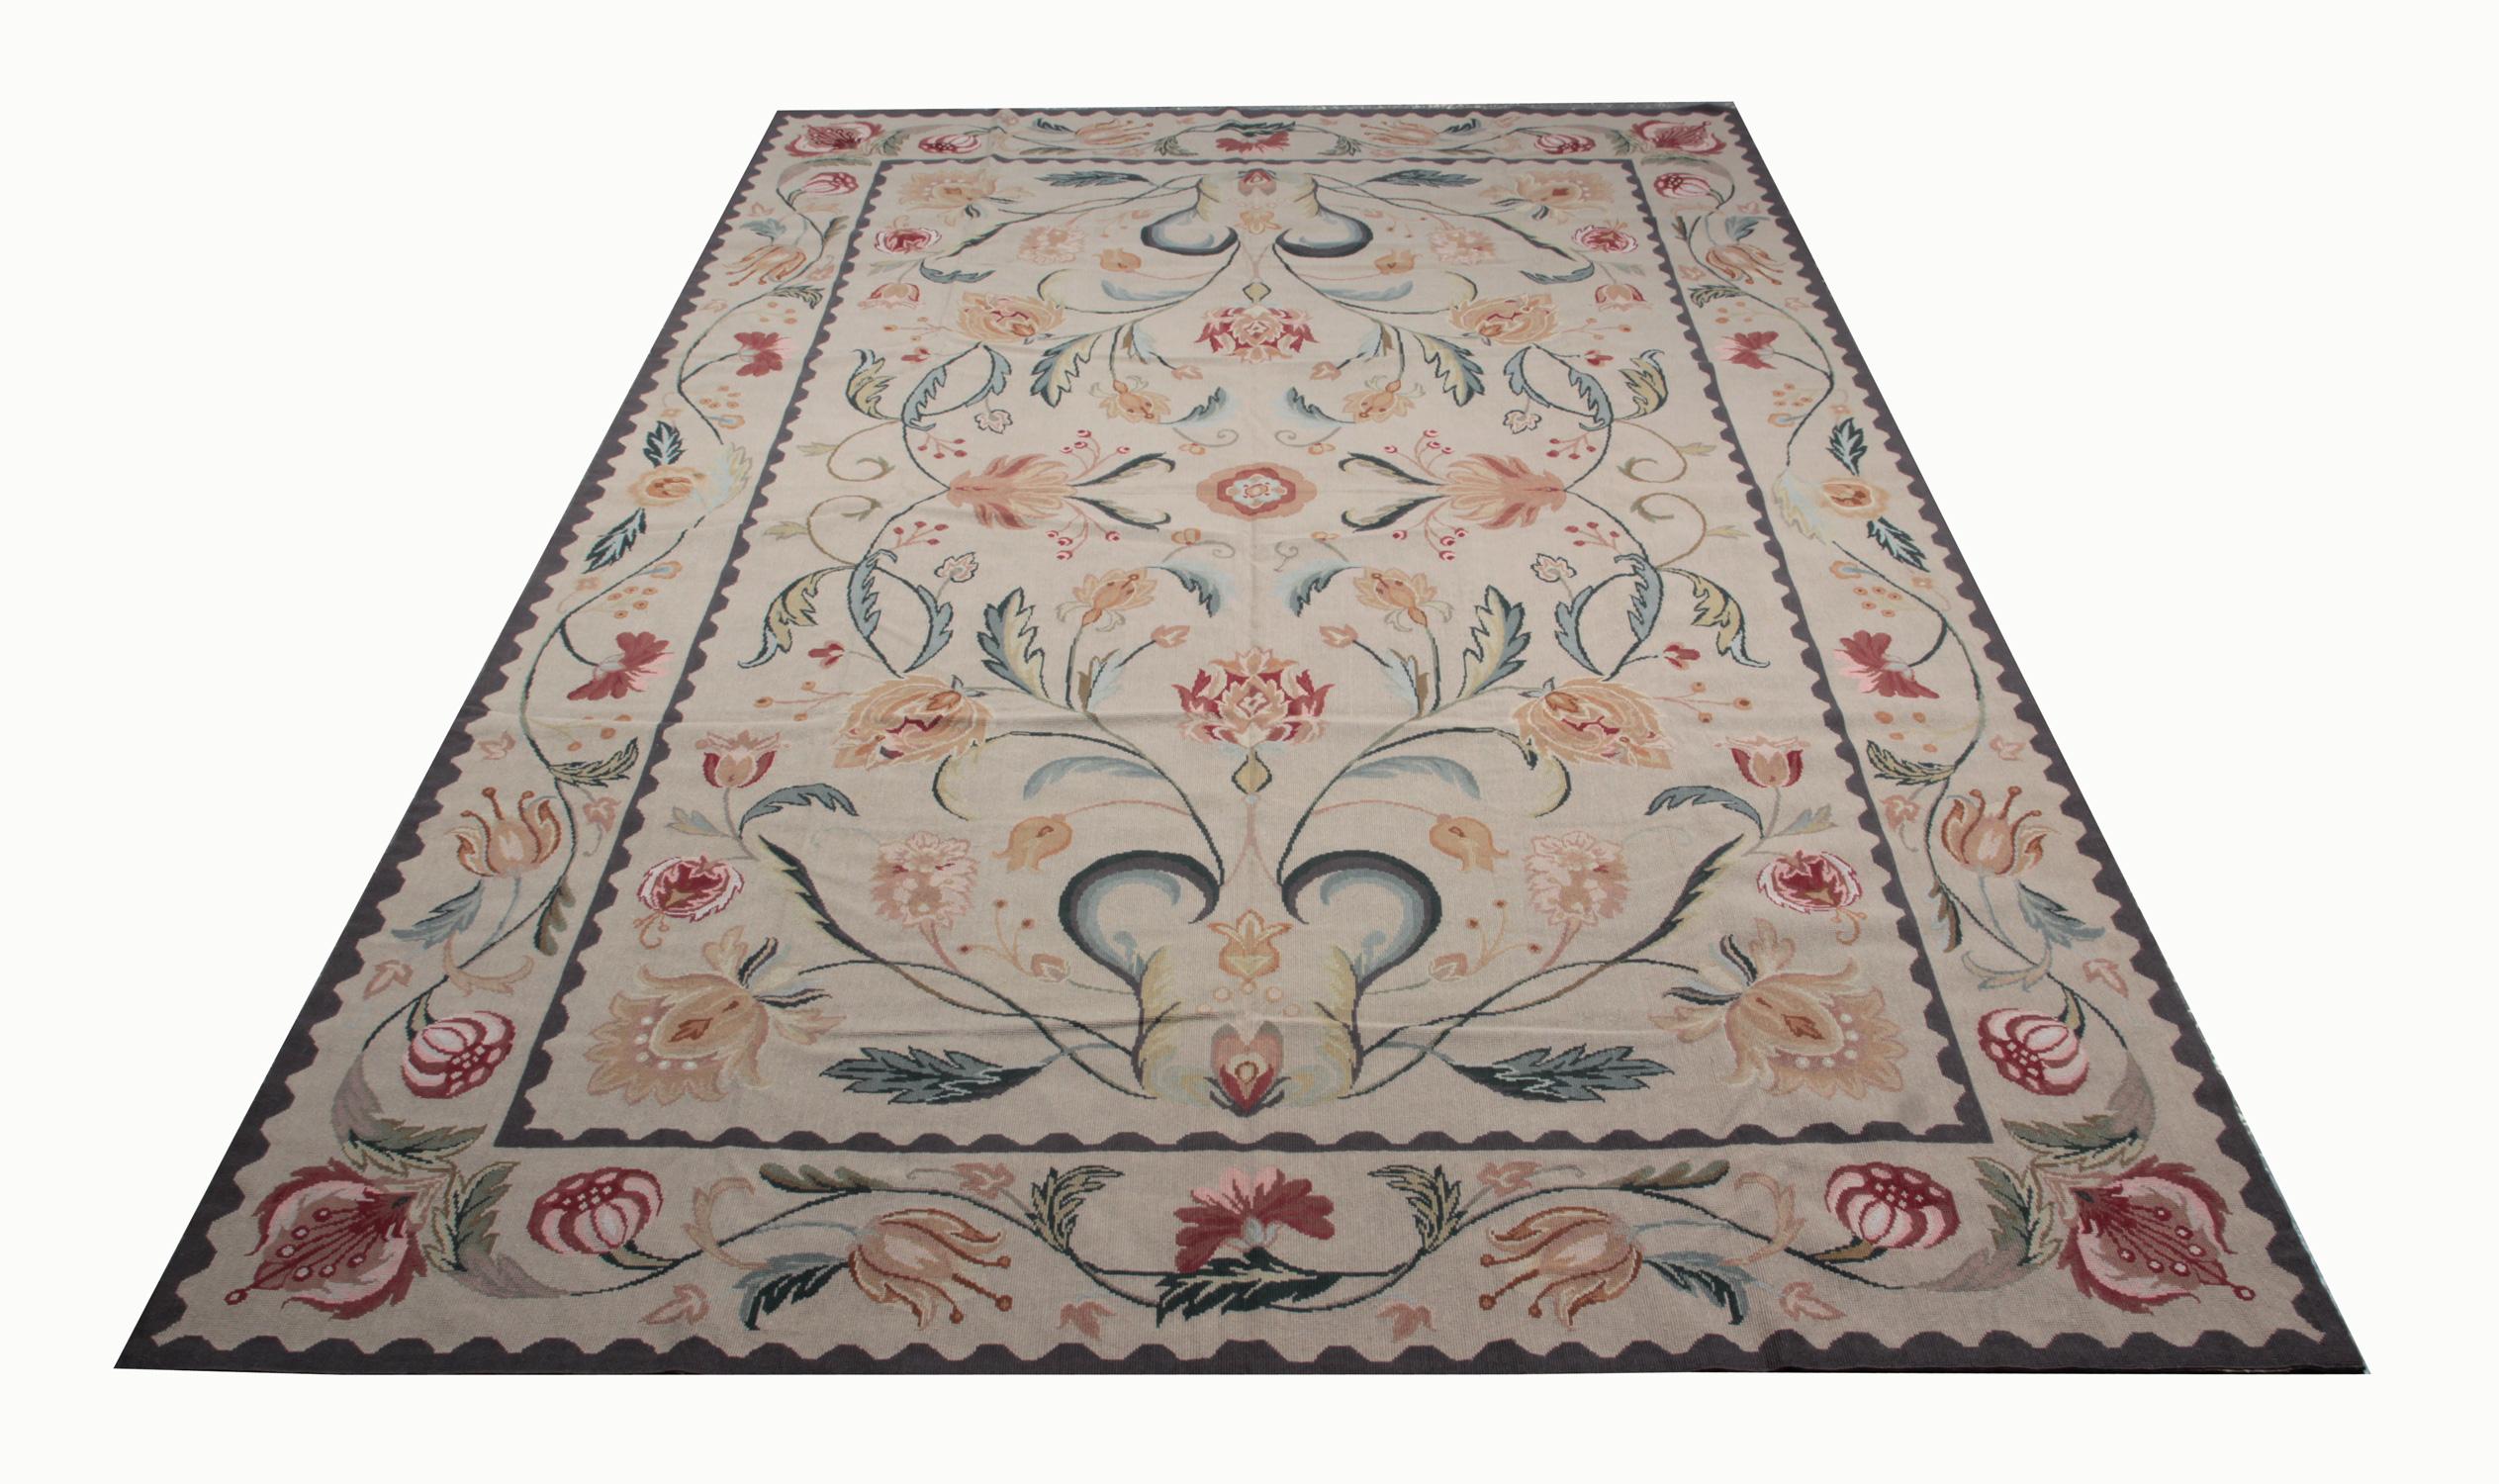 This Coffee brown rug is the very good item as living room rugs and getting most of the attention in rug store by clients because of the color and design. These handmade elegant Chinese Aubusson floor rugs has The soft shade of colors. these luxury